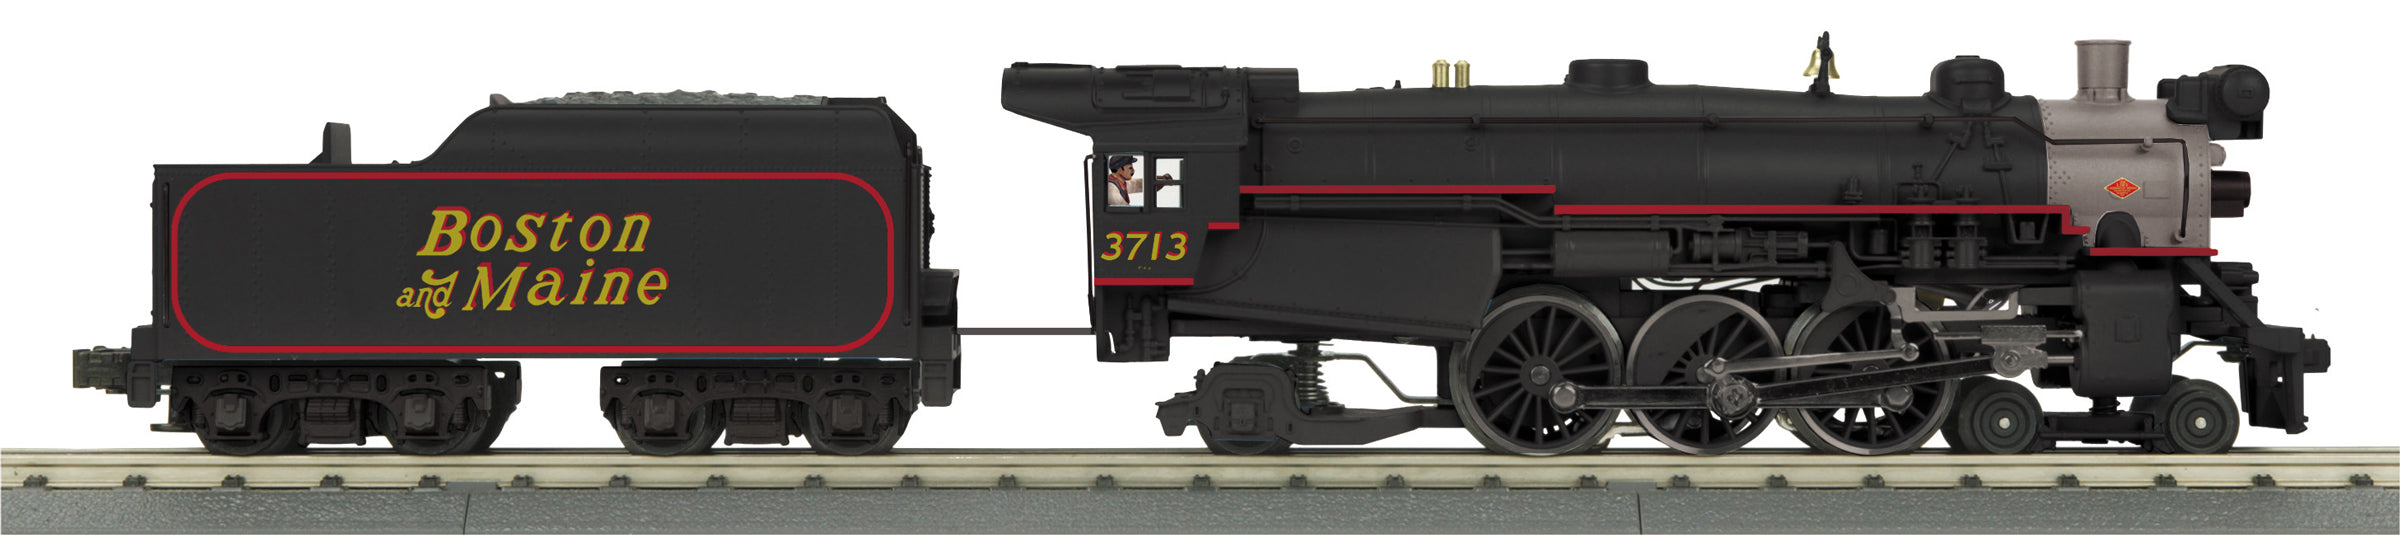 MTH 30-1882-1 - 4-6-2 Imperial P47 Pacific Steam Engine "Boston & Maine" #3713 w/ PS3